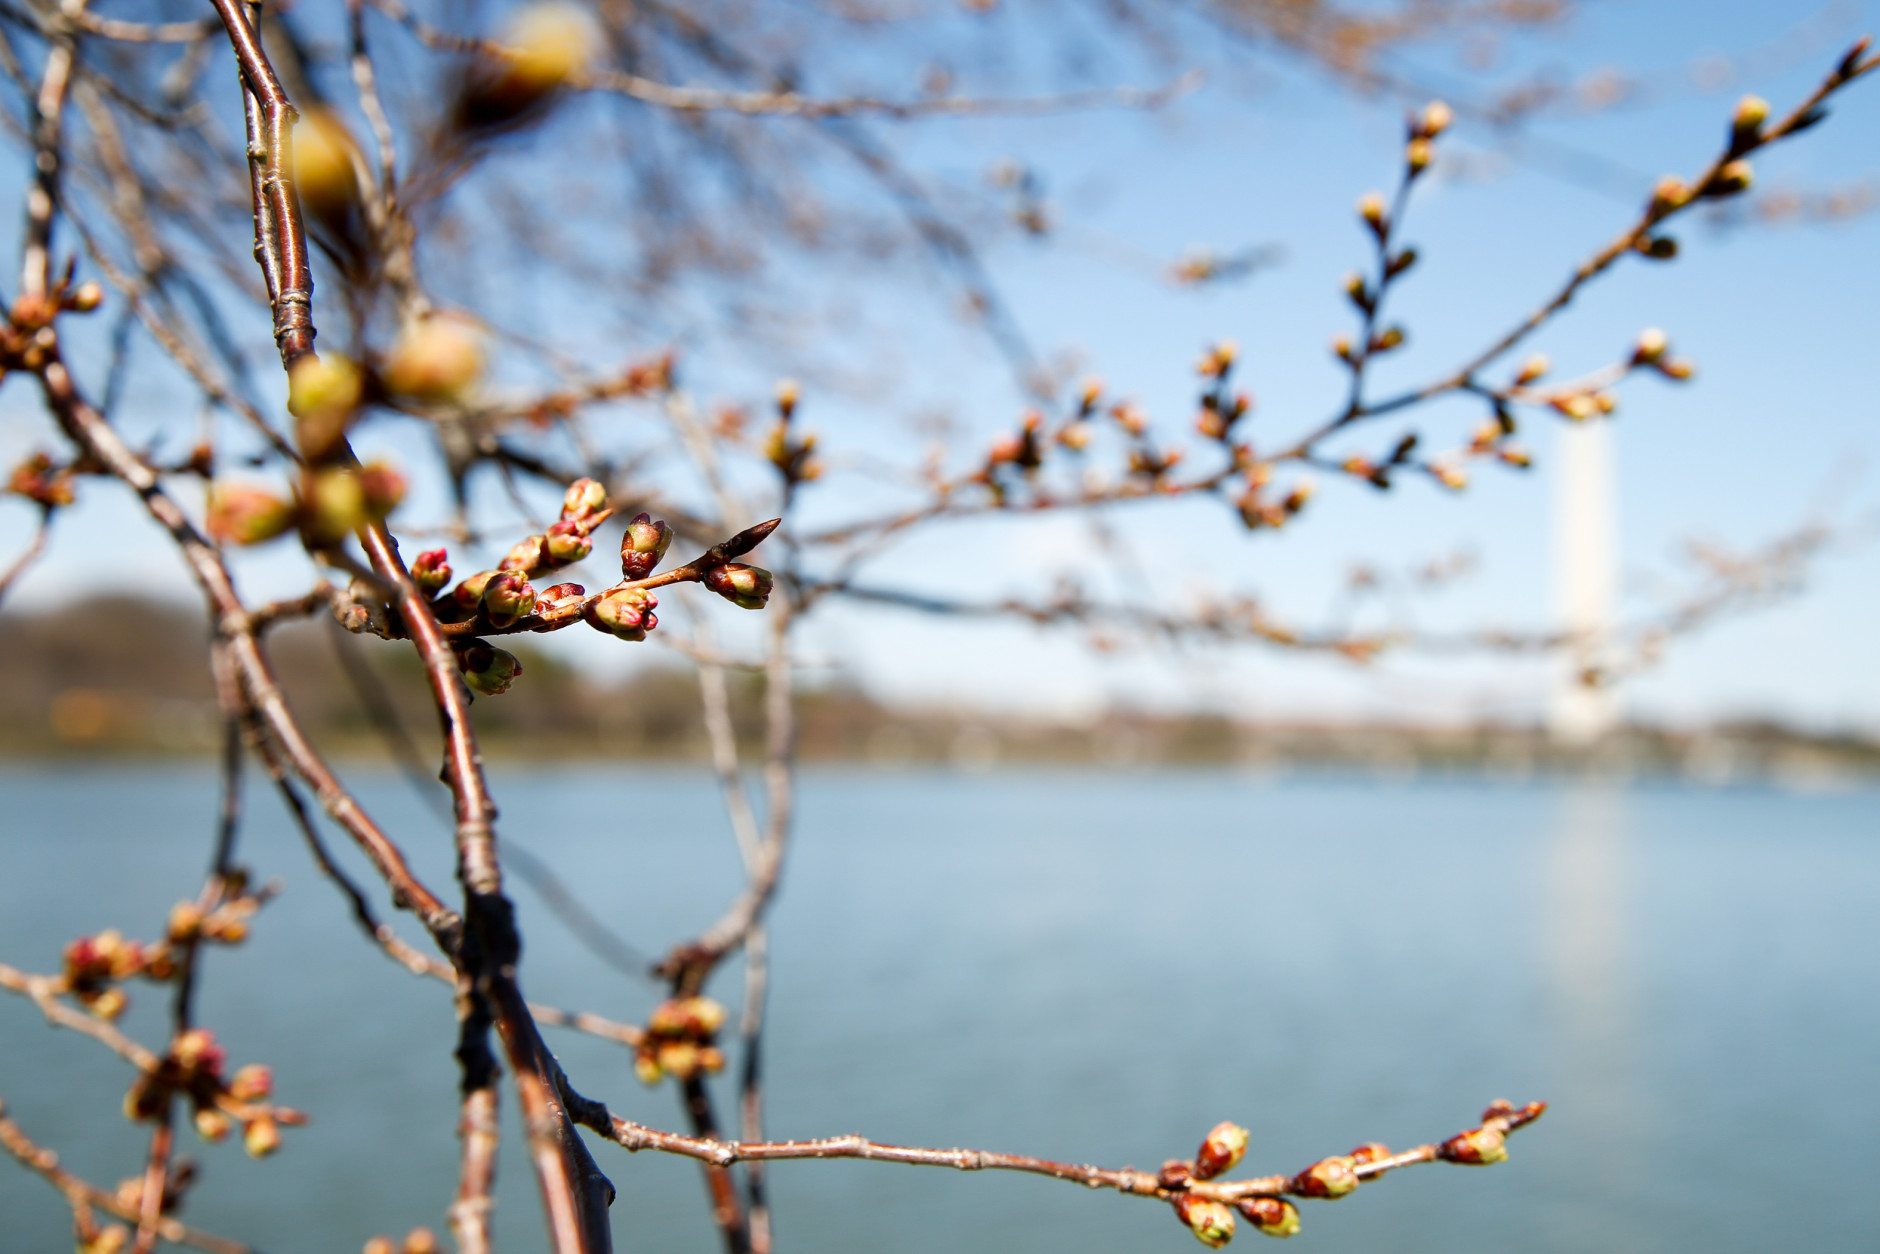 Cherry blossoms trees are near blooming along the Tidal Basin, Wednesday, April 1, 2015, in Washington. Officials are calling for a peak bloom period from April 11-14th, one week later then last year. (AP Photo/Andrew Harnik)